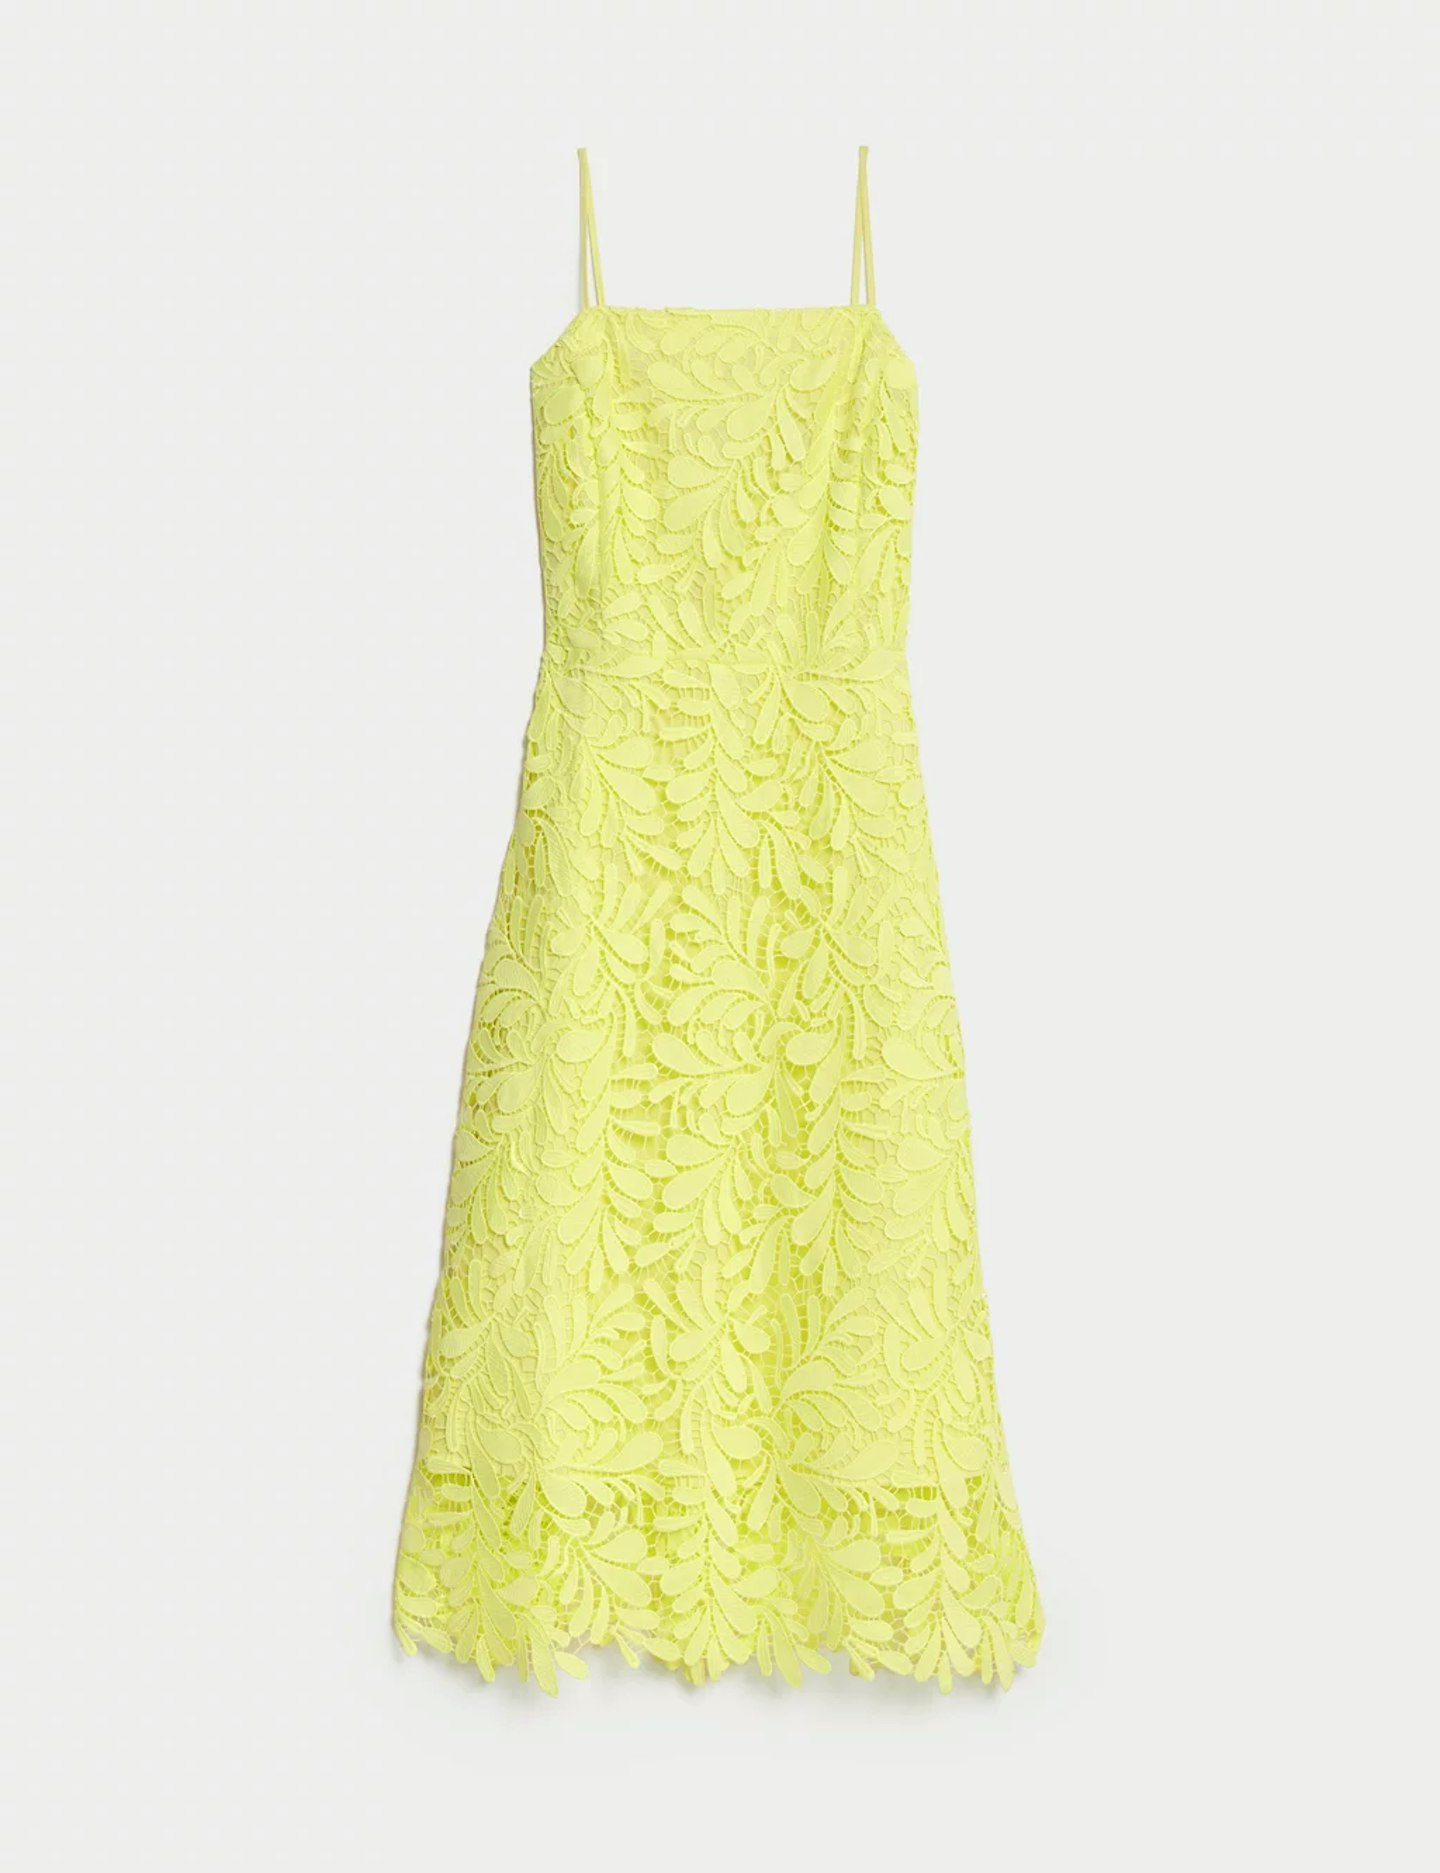 M&S, Lace Square-Neck Strappy Waisted Midi Dress